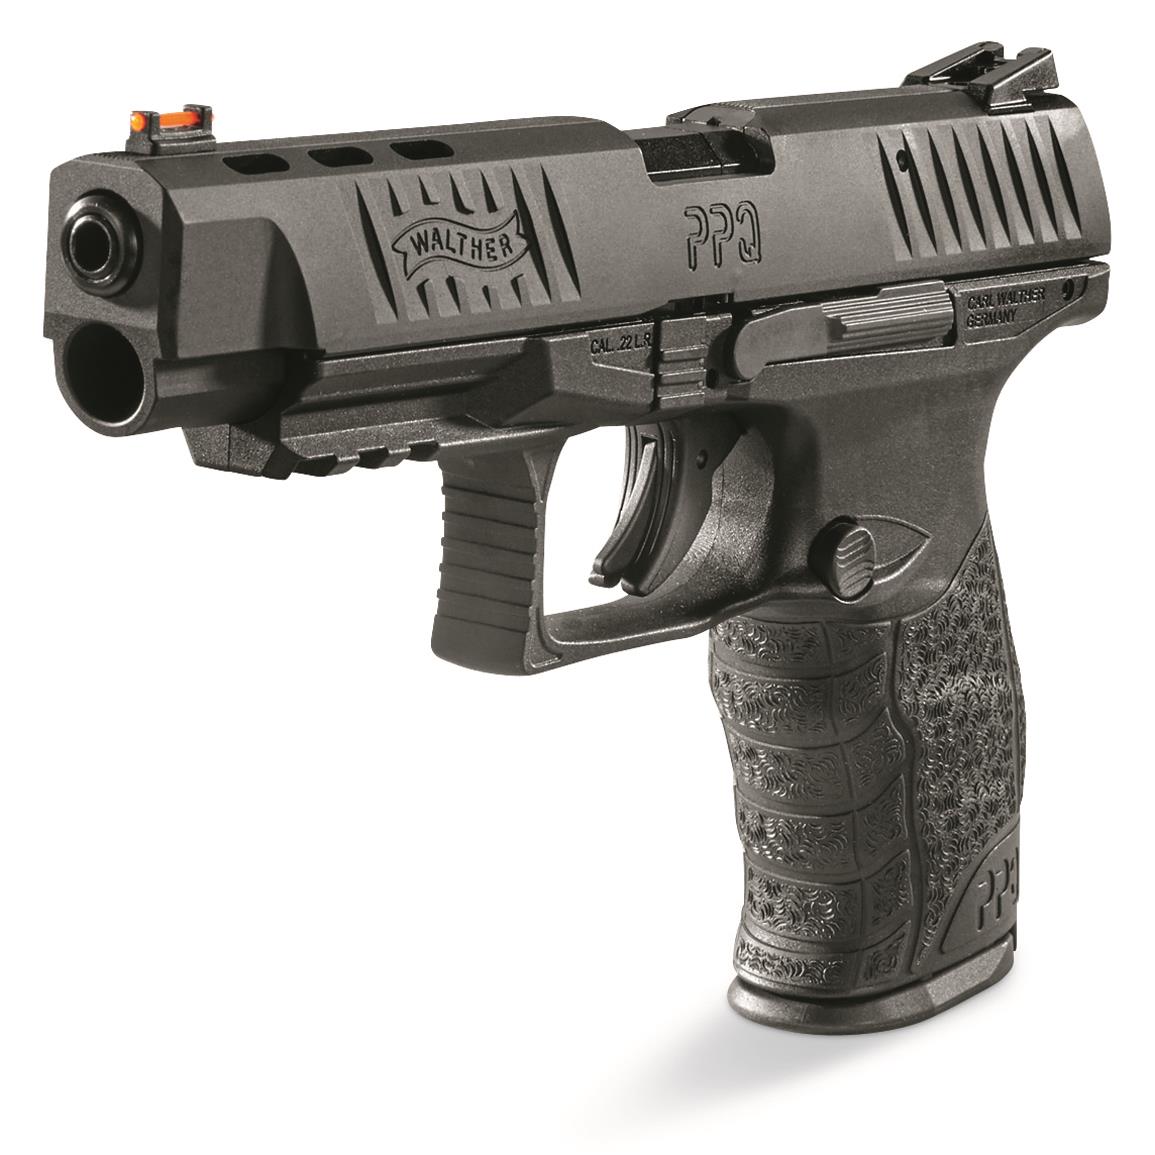 Walther Ppq 22Lr Review